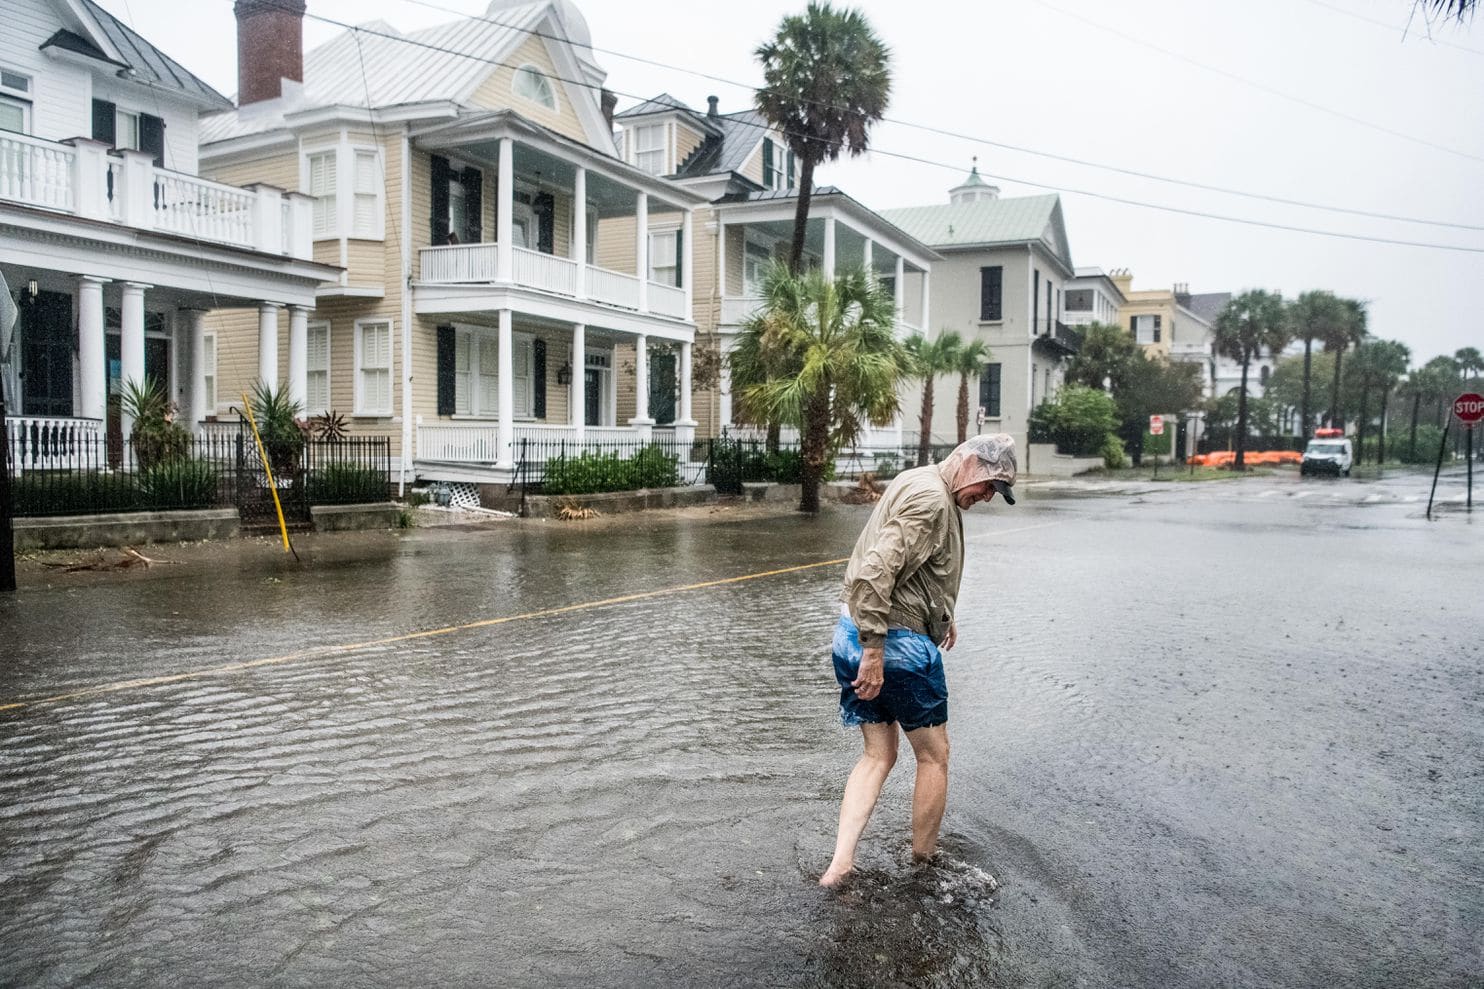 Tourists and Developers Love Charleston. So Do Hurricanes.